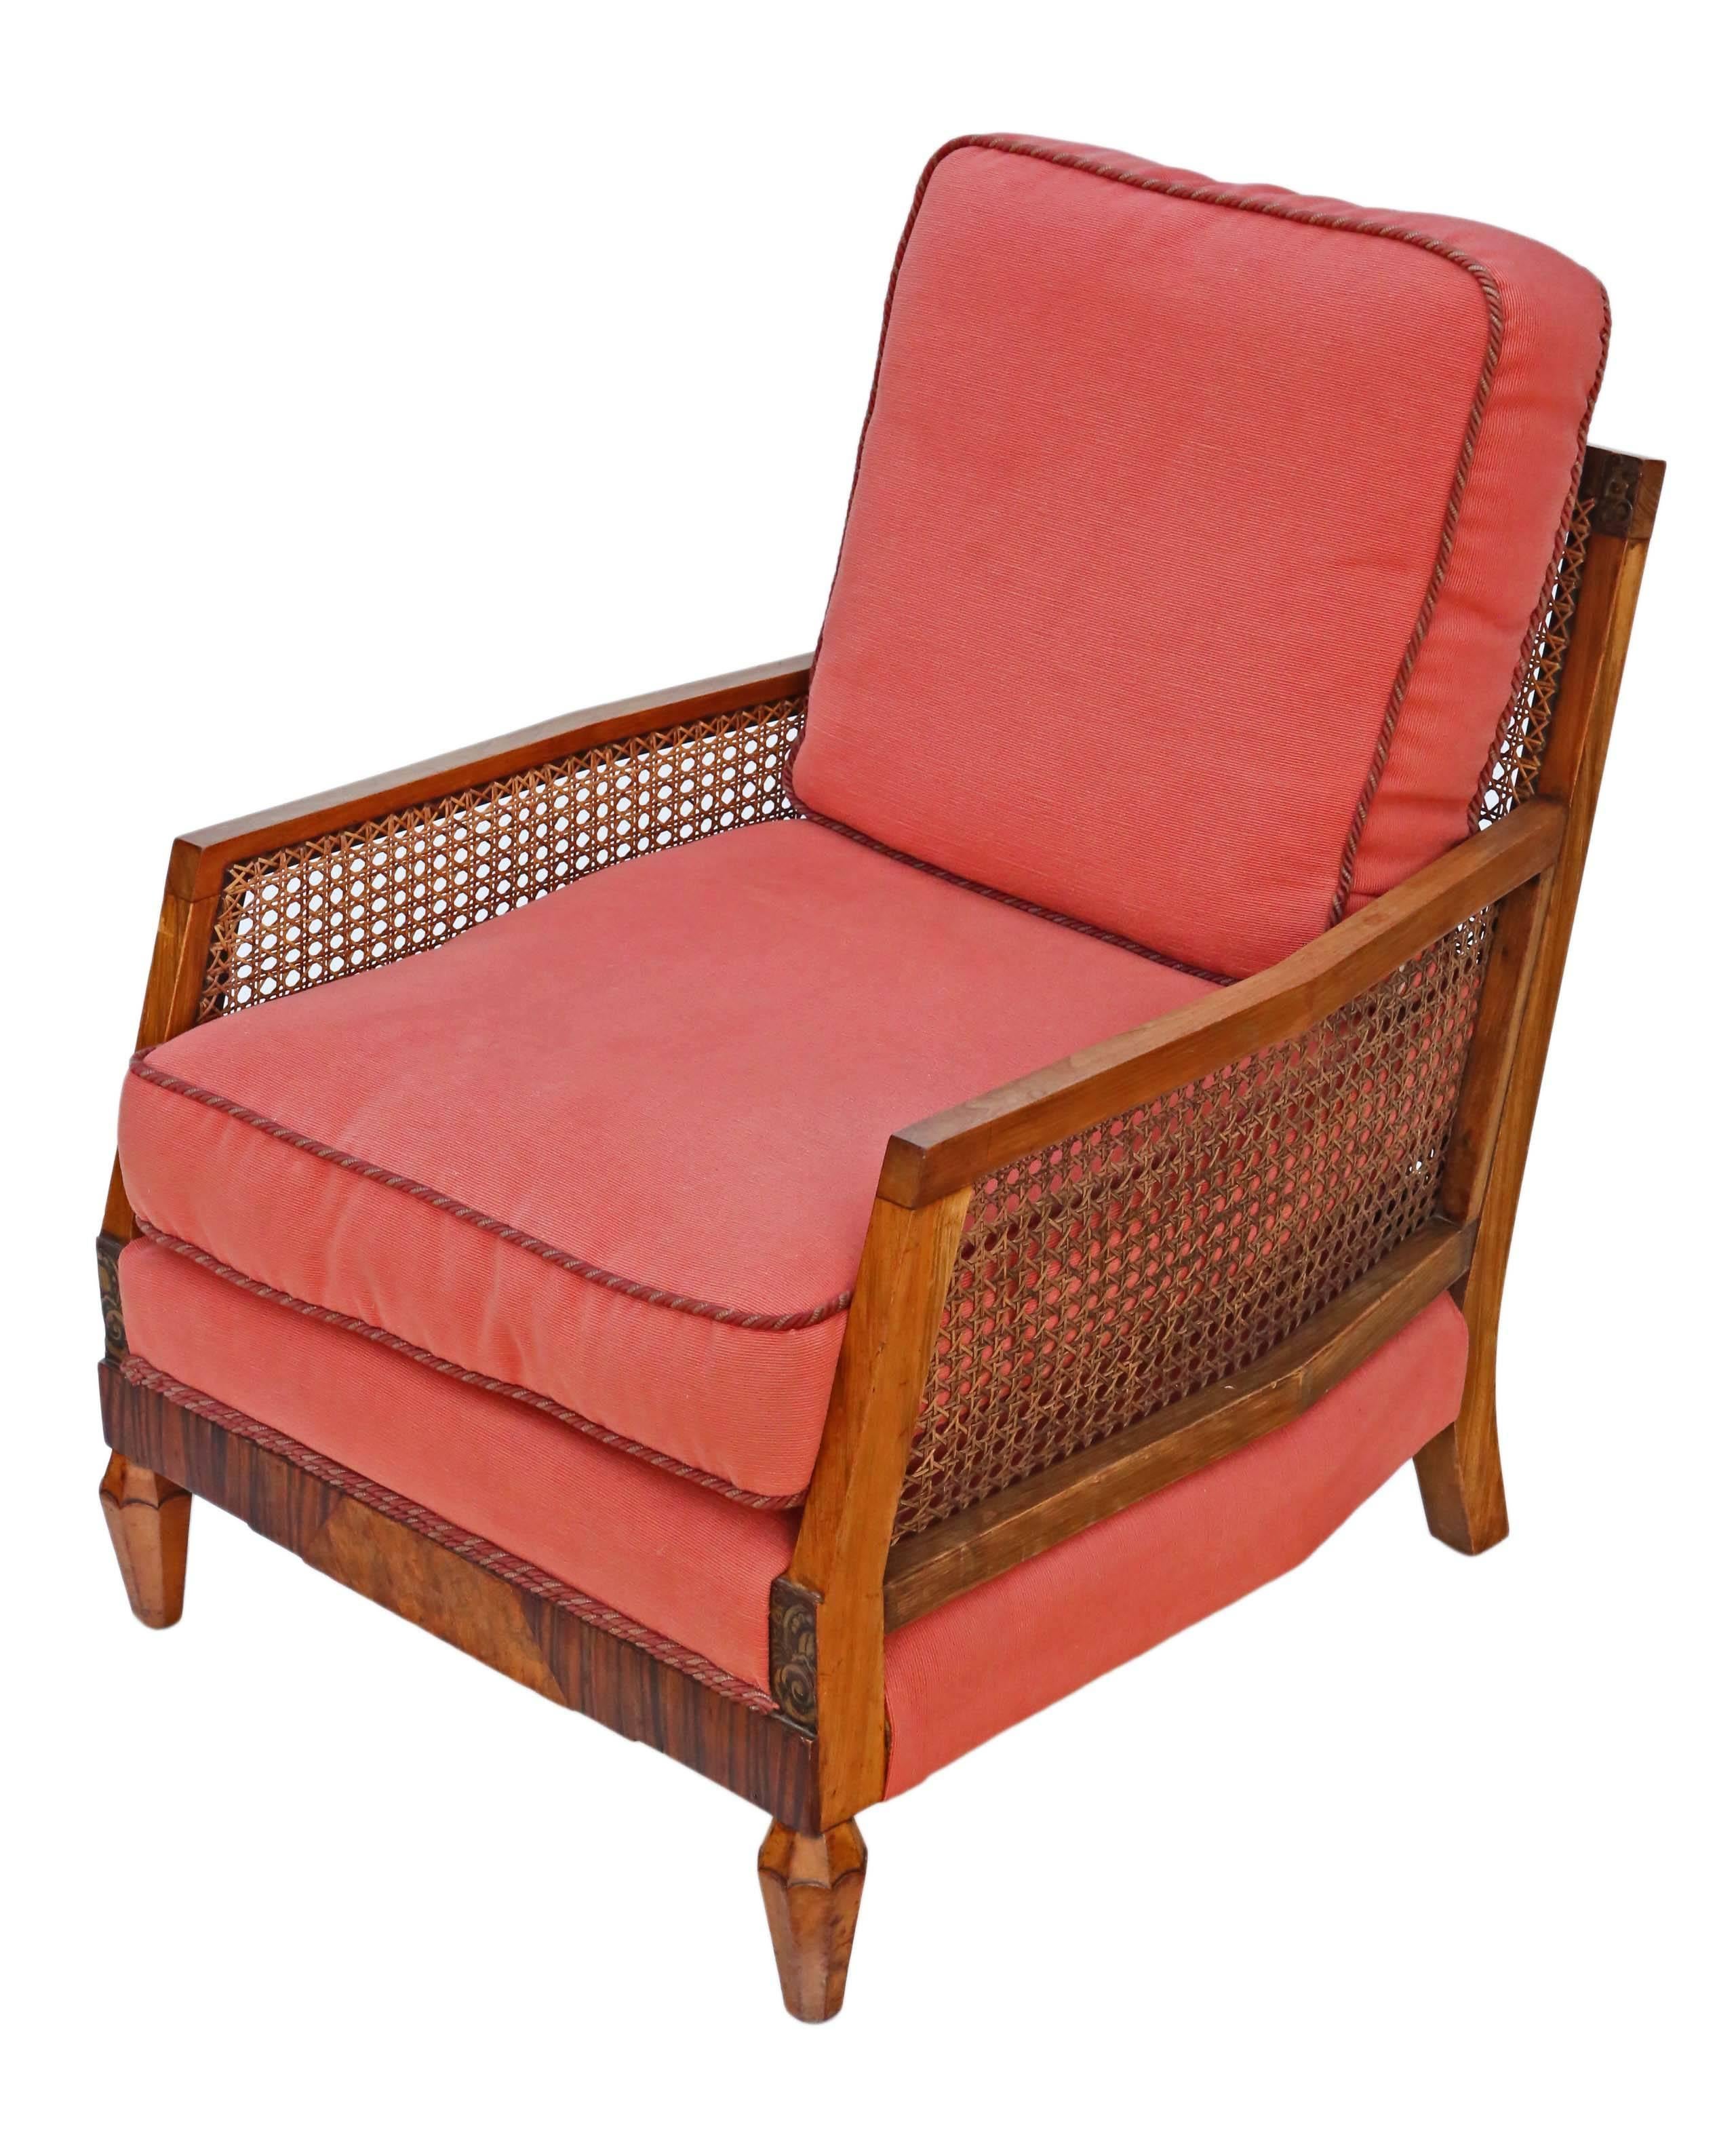 Antique quality Art Deco, circa 1920-1930 burr walnut and rosewood Bergere armchair. A wonderful rare quality period piece.

Solid and strong, with no loose joints. Full of age, character and charm. The upholstery is not new, but has no